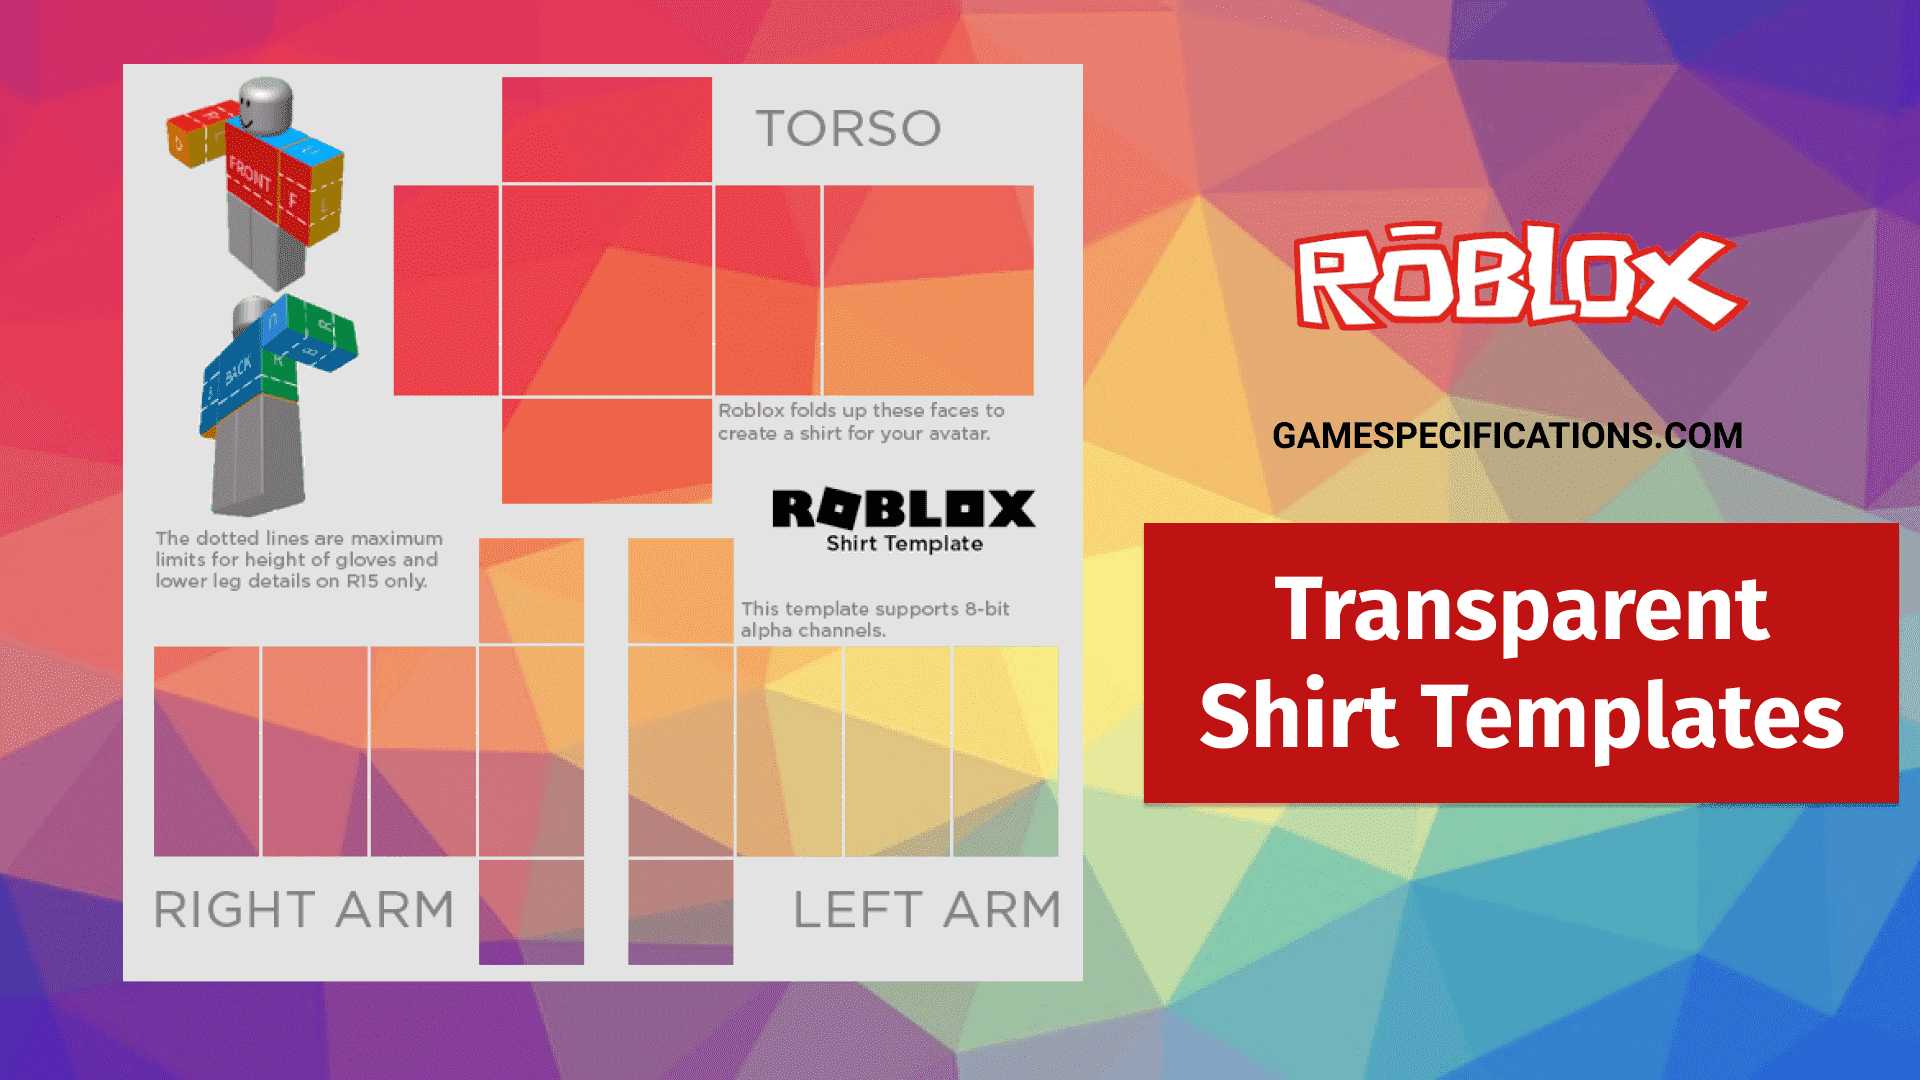 Roblox Transparent Shirt Templates And How To Make Them Game Specifications - assassins creed roblox clothes